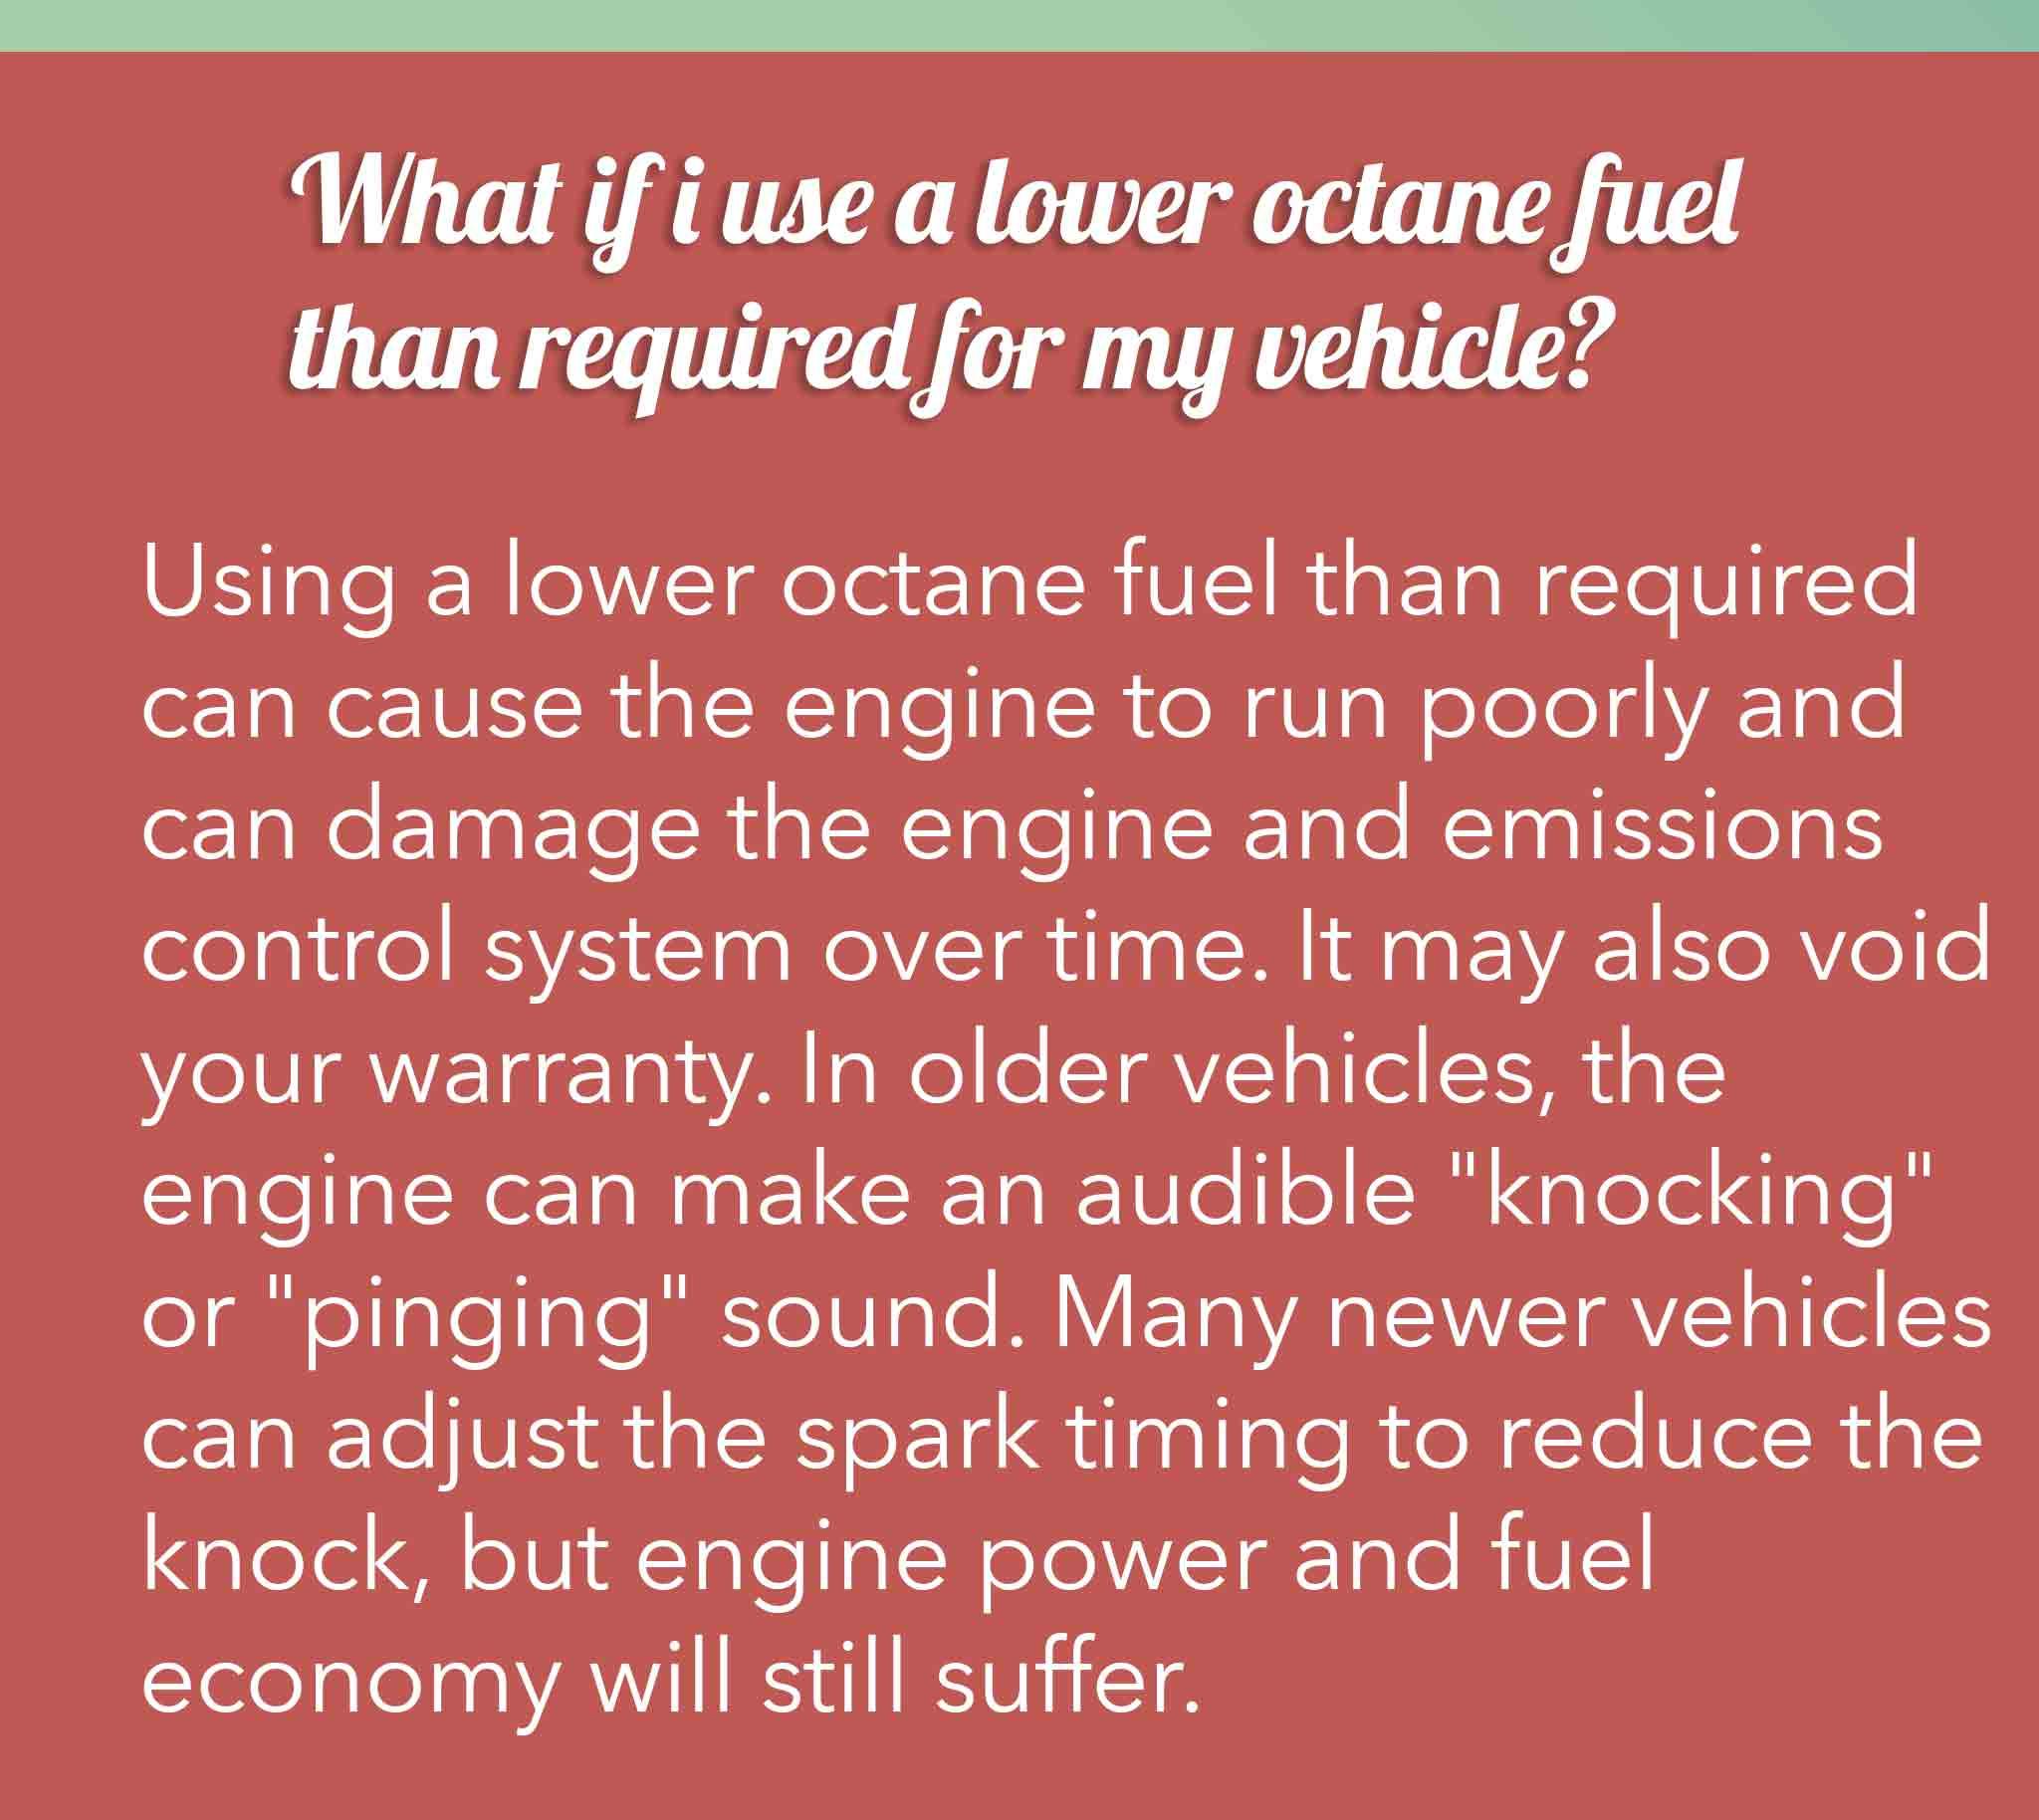 Using a lower octane fuel than required can cause the engine to run poorly and can damage the engine and emissions control system over time. It may also void your warranty. In older vehicles, the engine can make an audible "knocking" or "pinging" sound. Many newer vehicles can adjust the spark timing to reduce the knock, but engine power and fuel economy will still suffer.